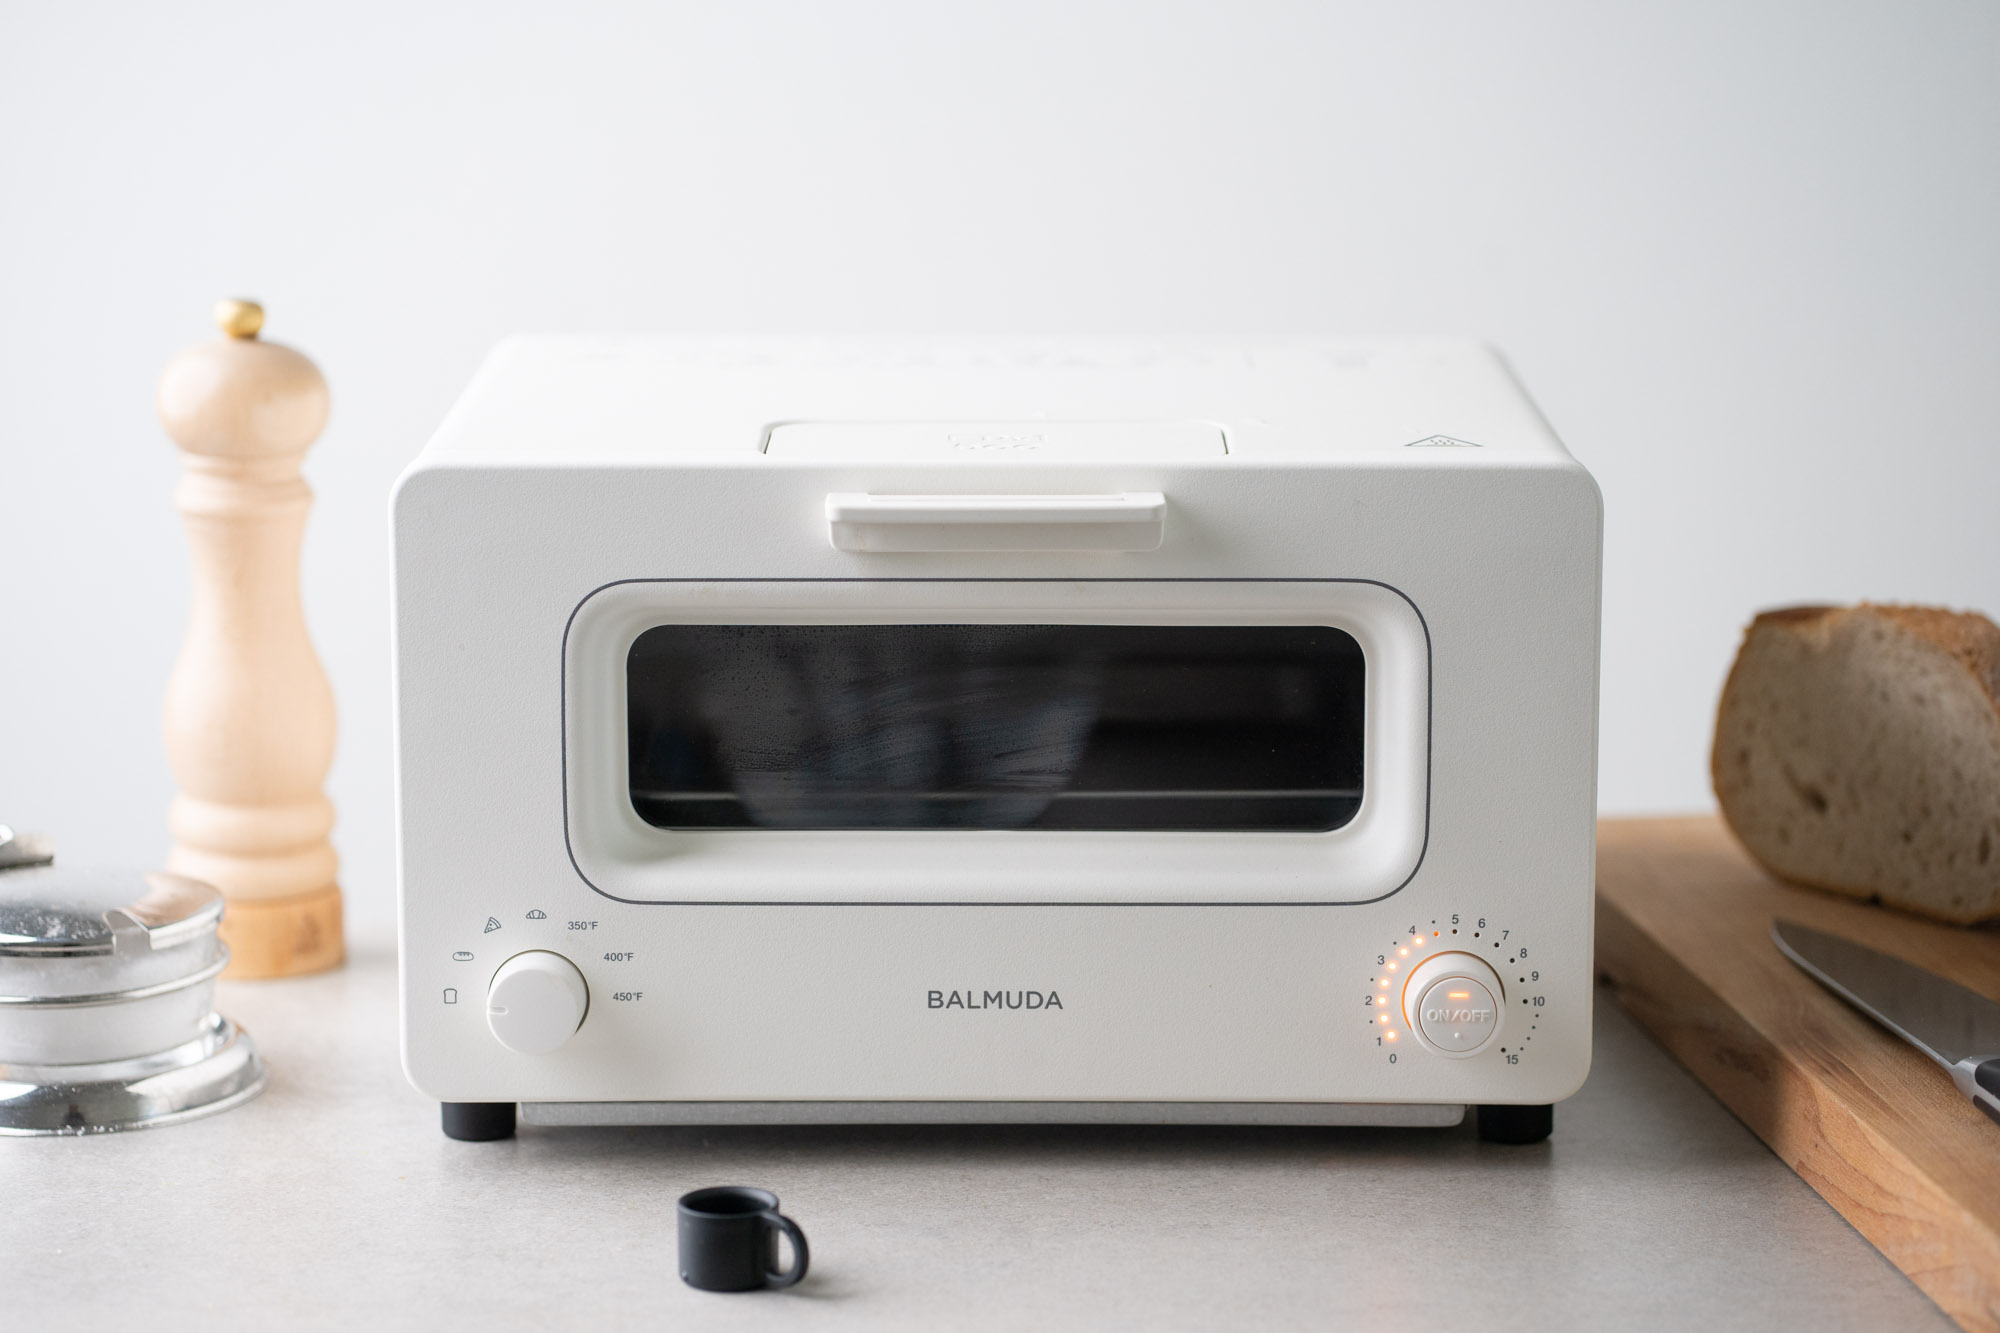 BALMUDA The Toaster Steam Toaster Oven, Black or White on Food52